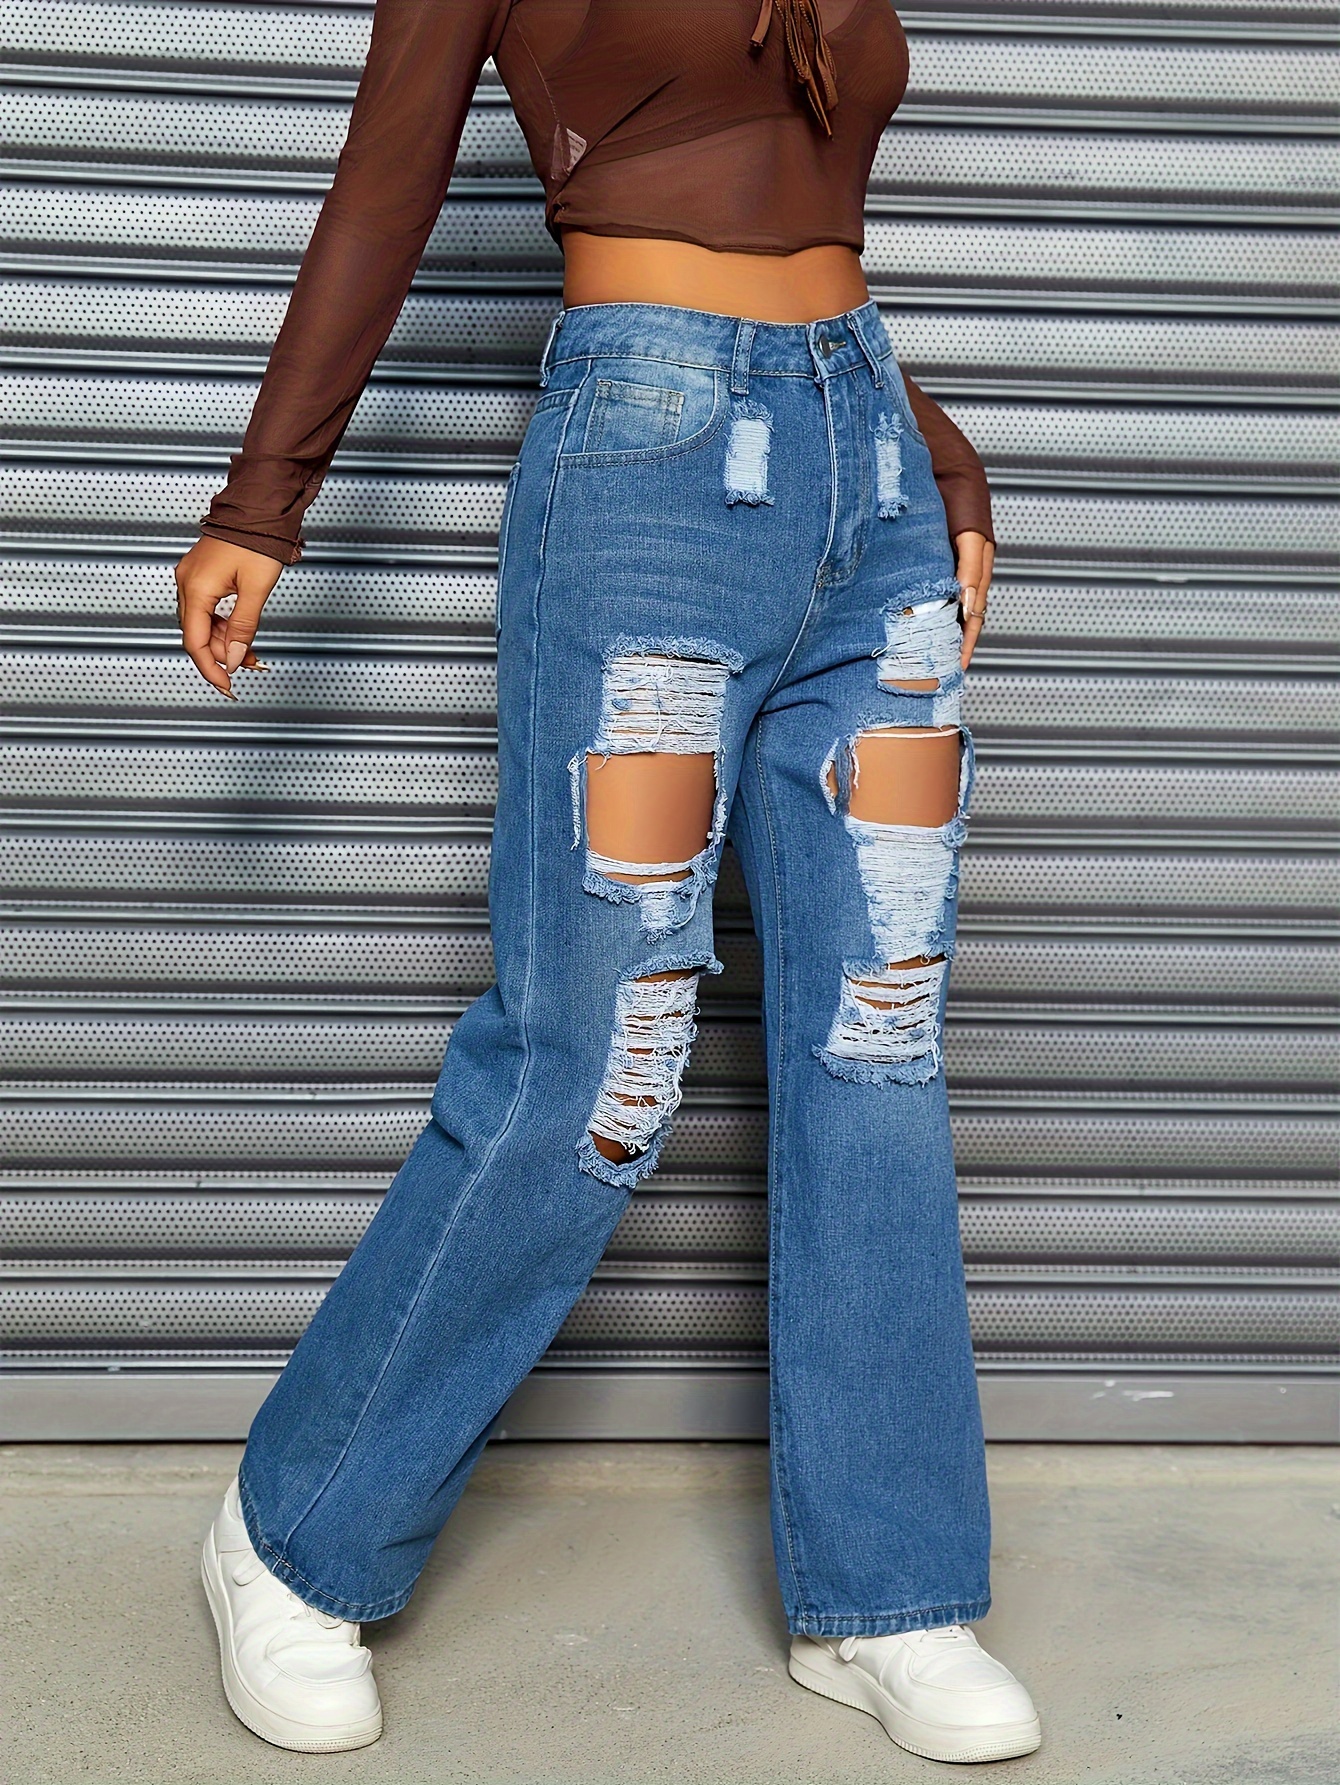 ripped high rise loose fit denim pants washed blue distressed casual straight leg jeans womens denim jeans clothing